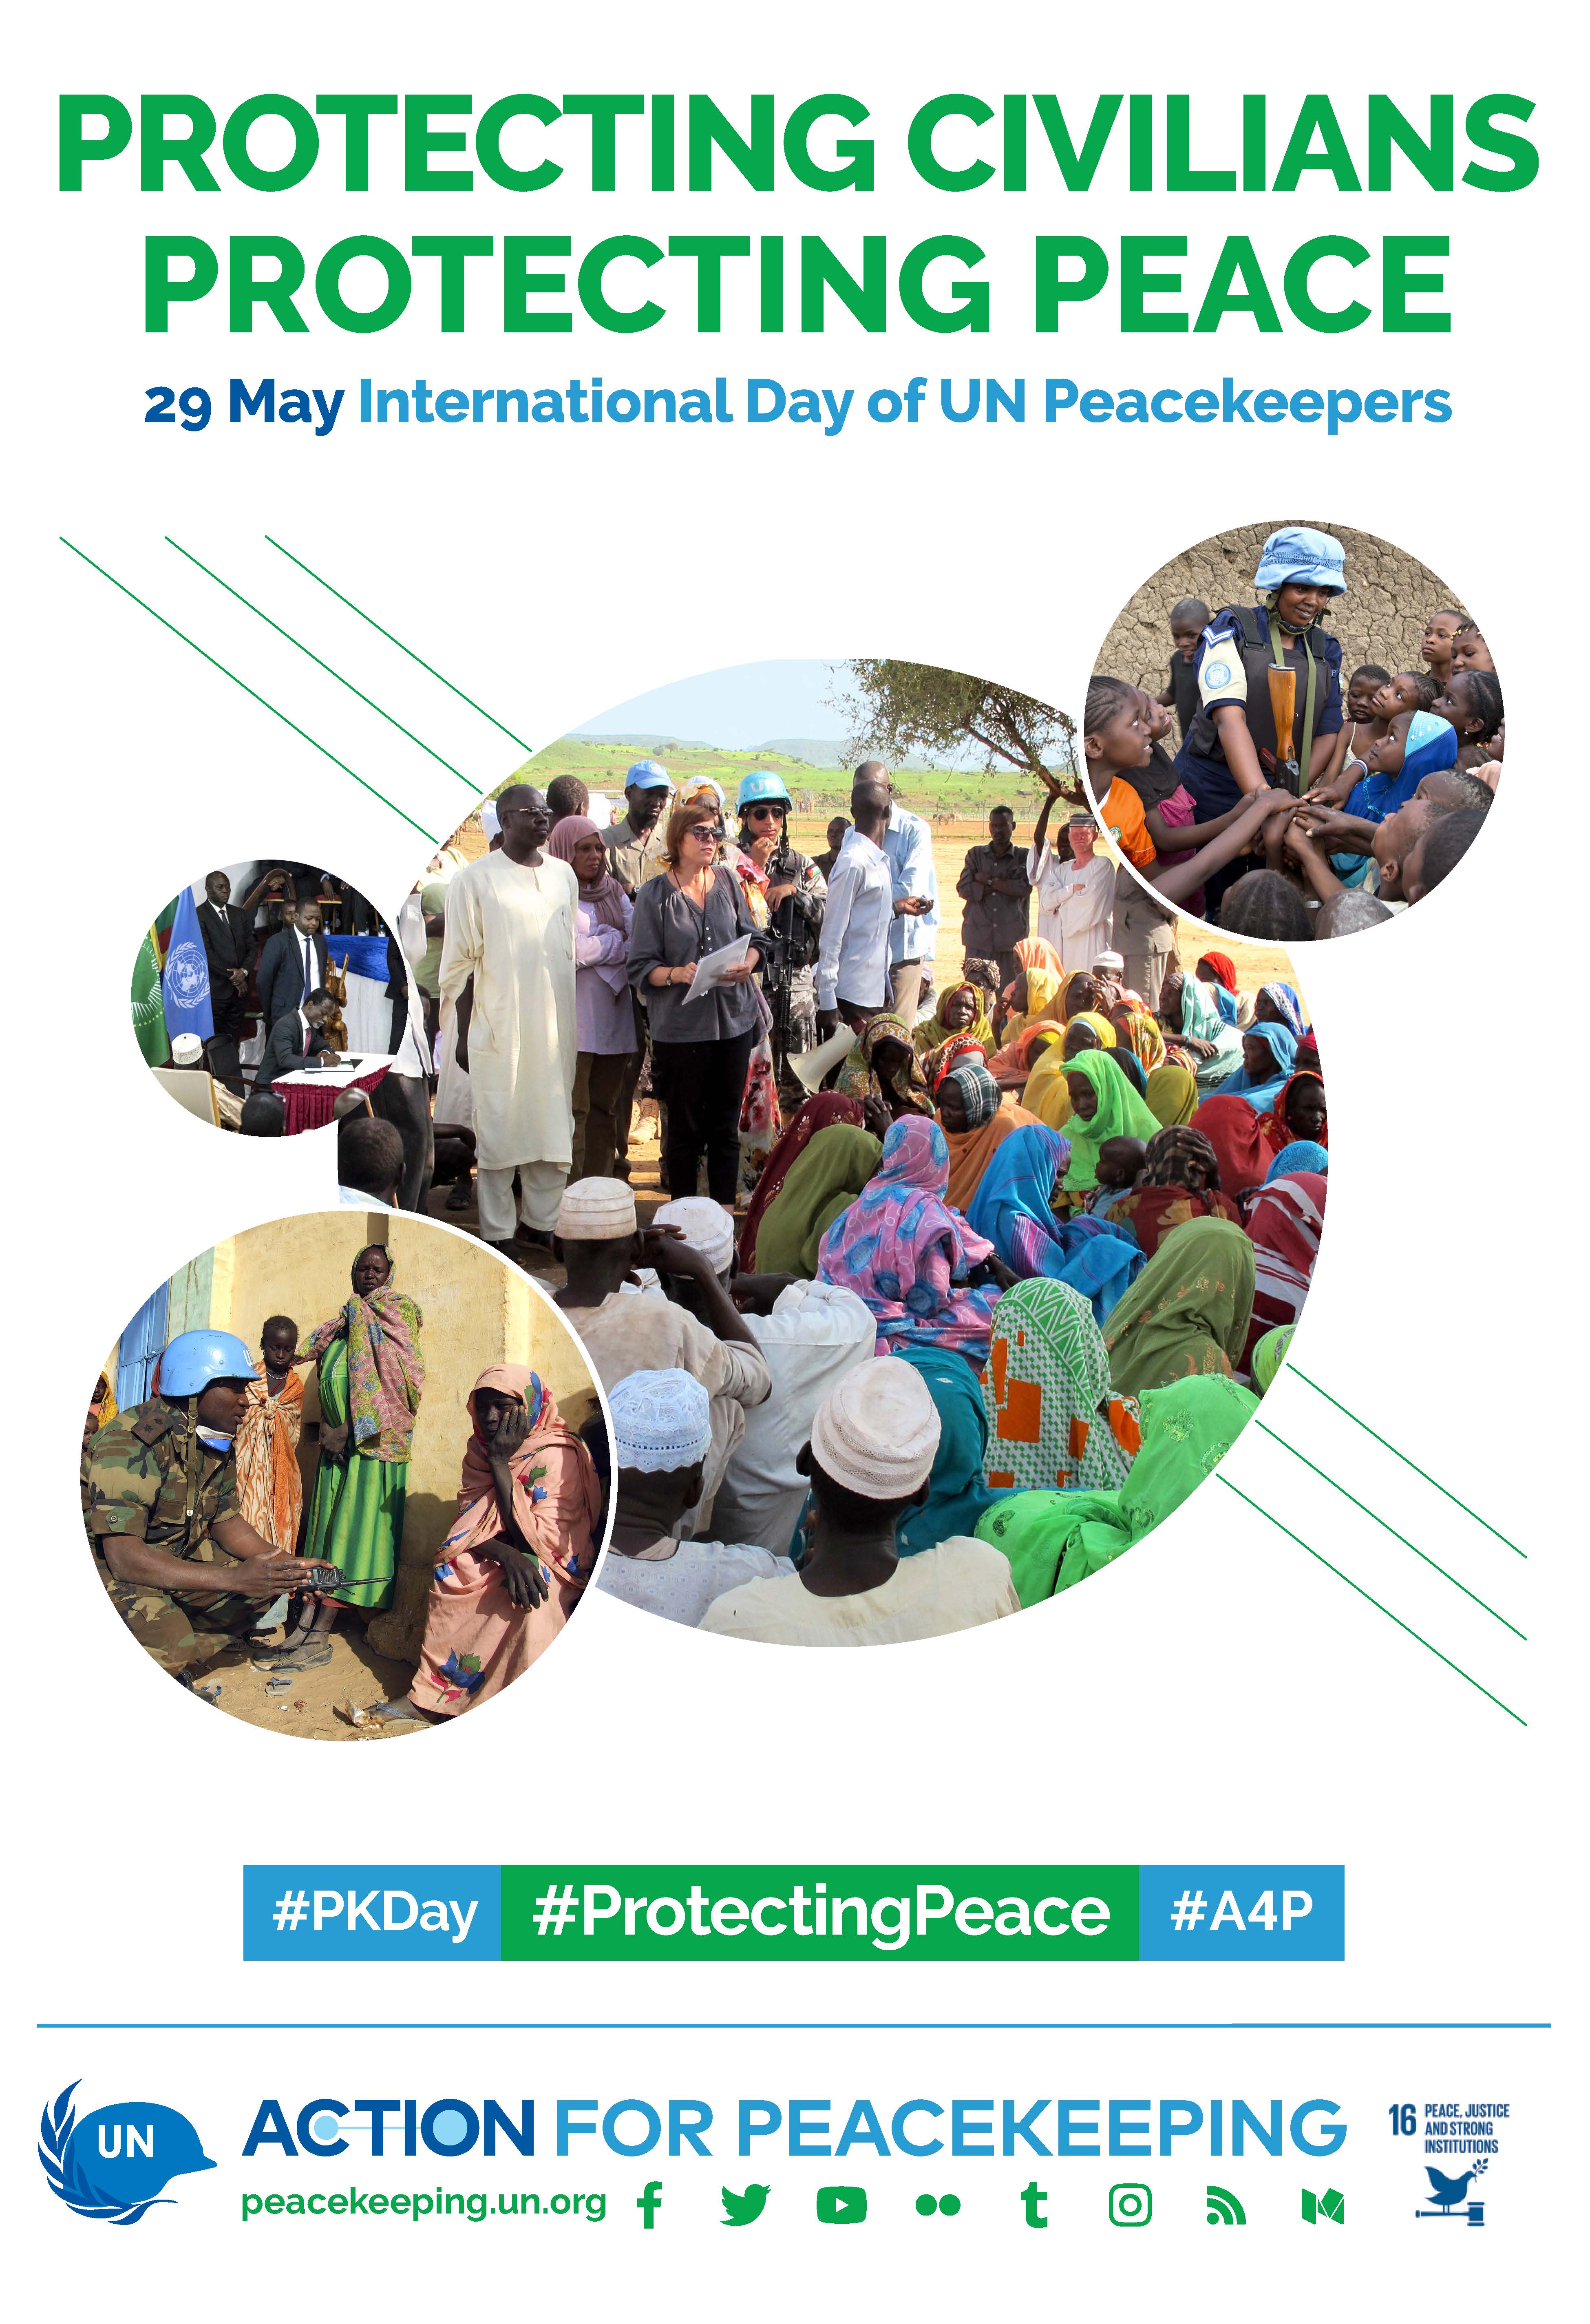 Protecting Civilians Protecting Peace - campaign poster with several images of blue helmet UN staff in the field working with civilians